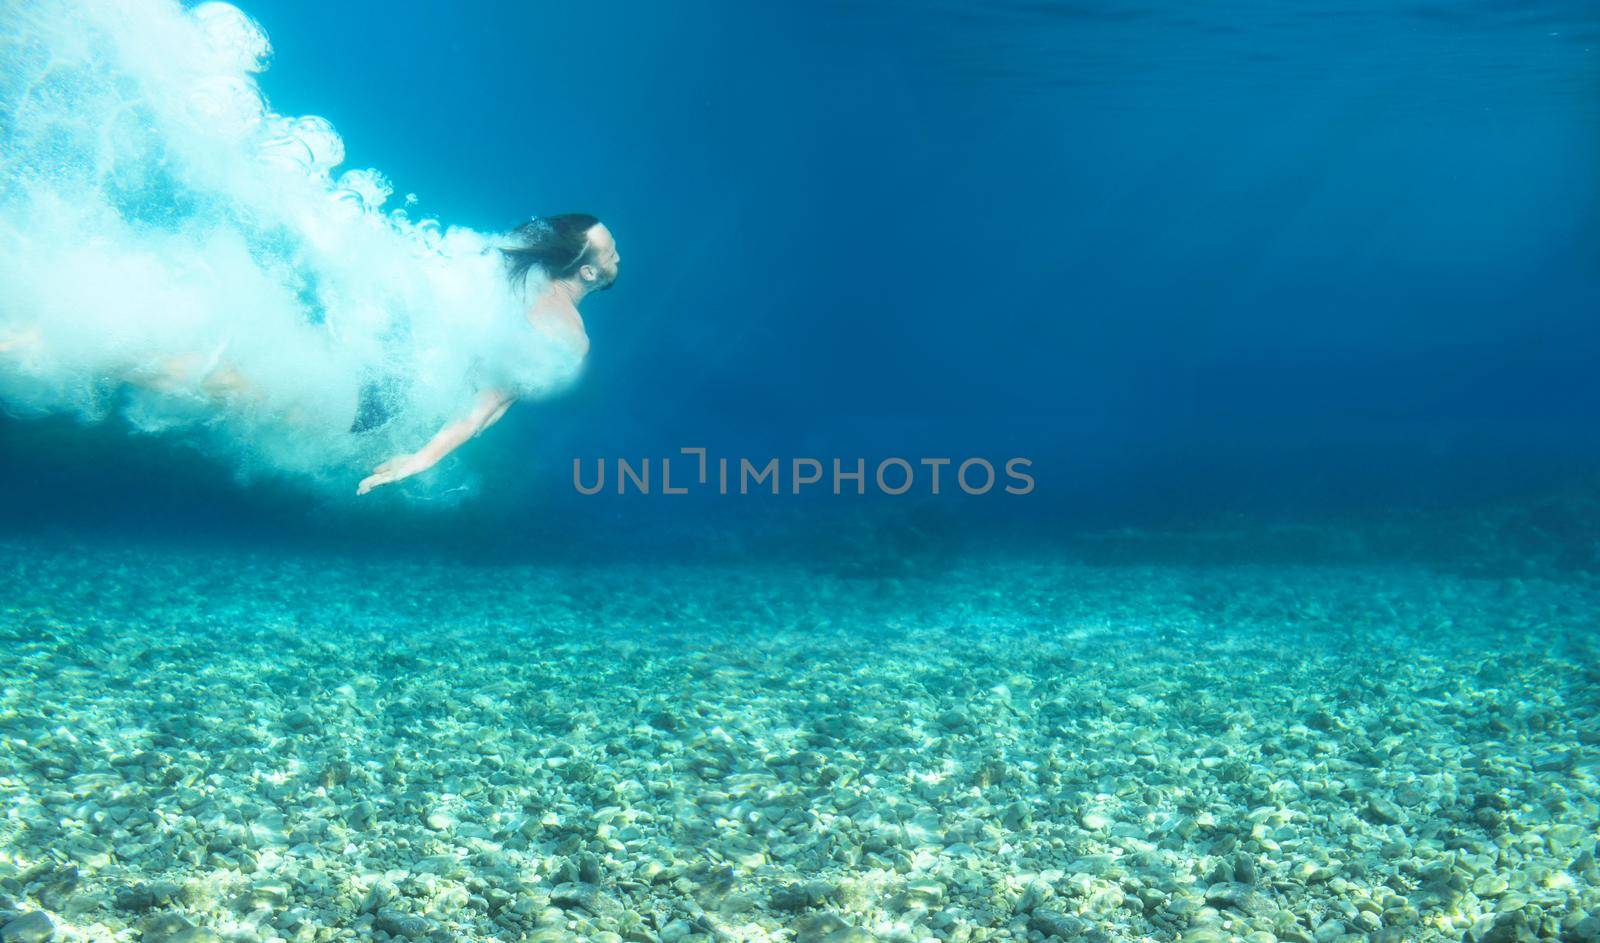 Man swimming under water in blue transparent sea underwater shot copy space for text